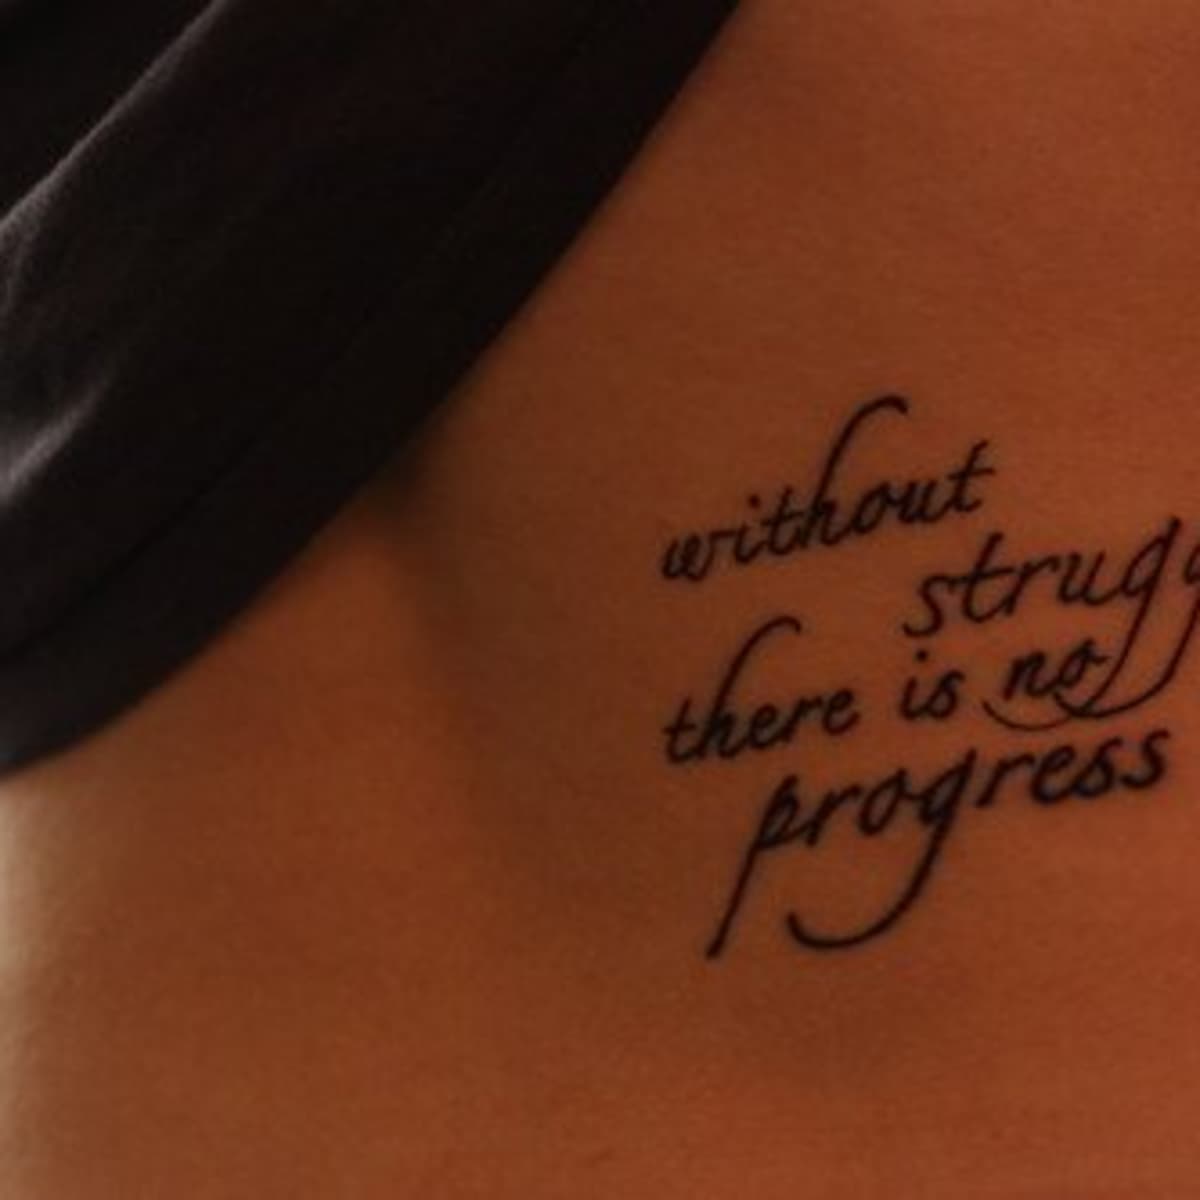 tattoo ideas quotes strength adversity courage